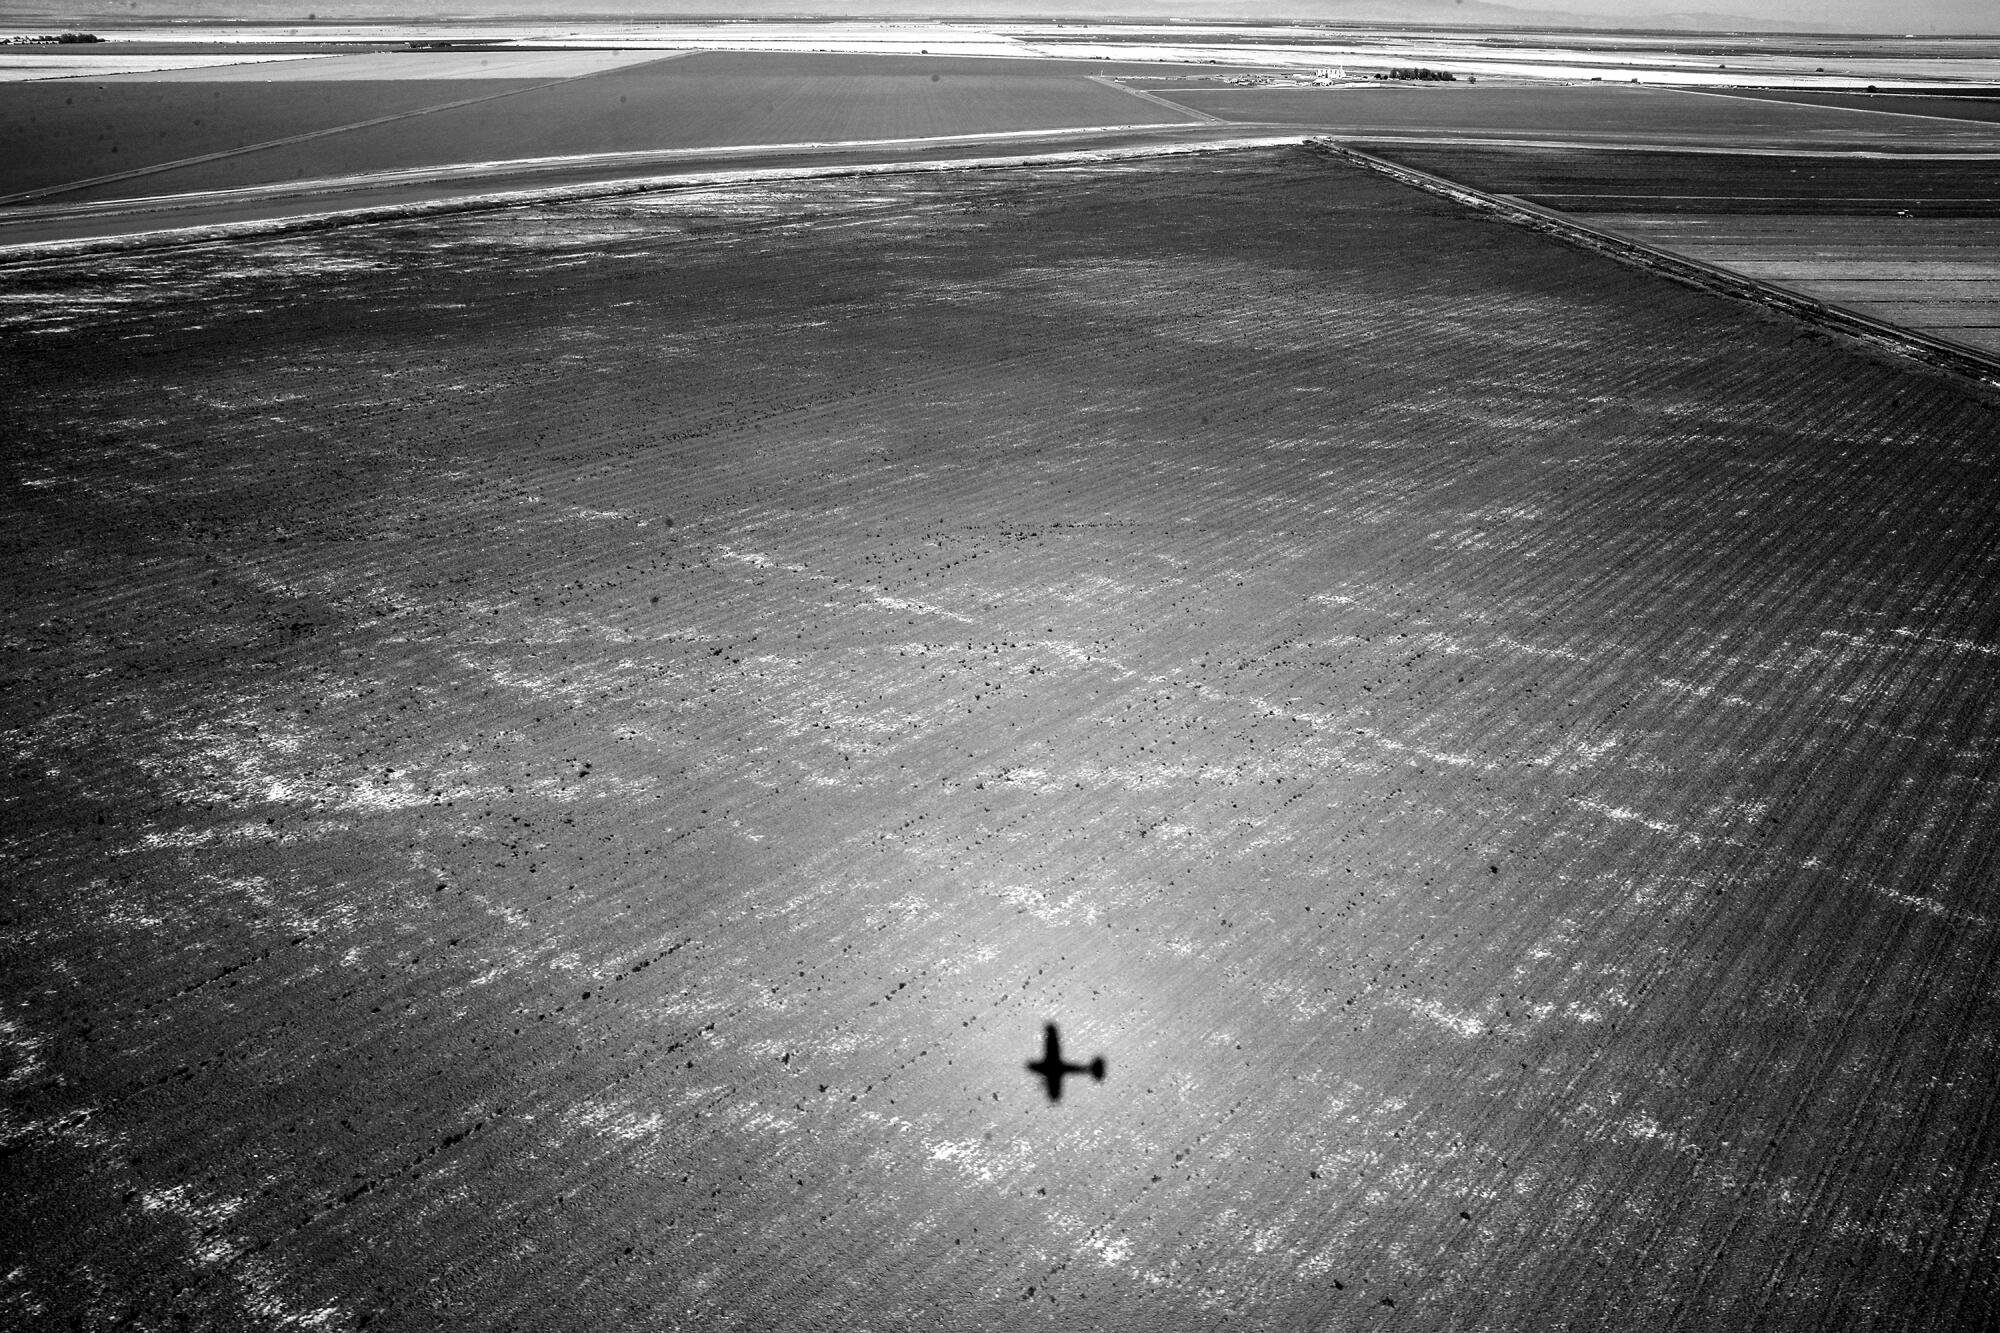 The shadow of small airplane passes over farmland.